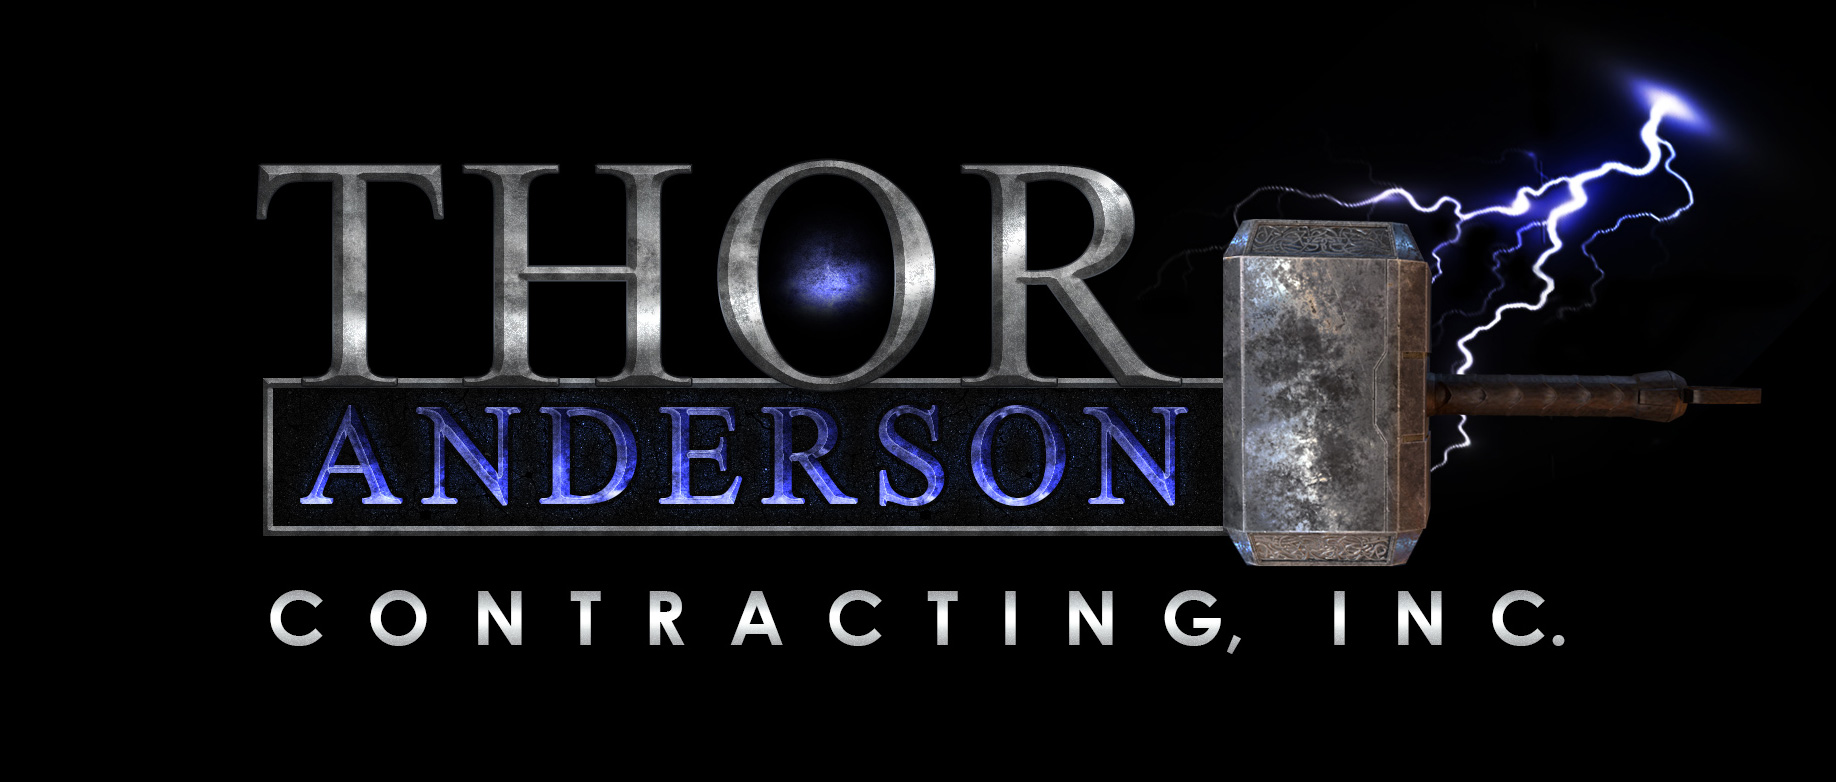 Thor Anderson Contracting Inc Logo